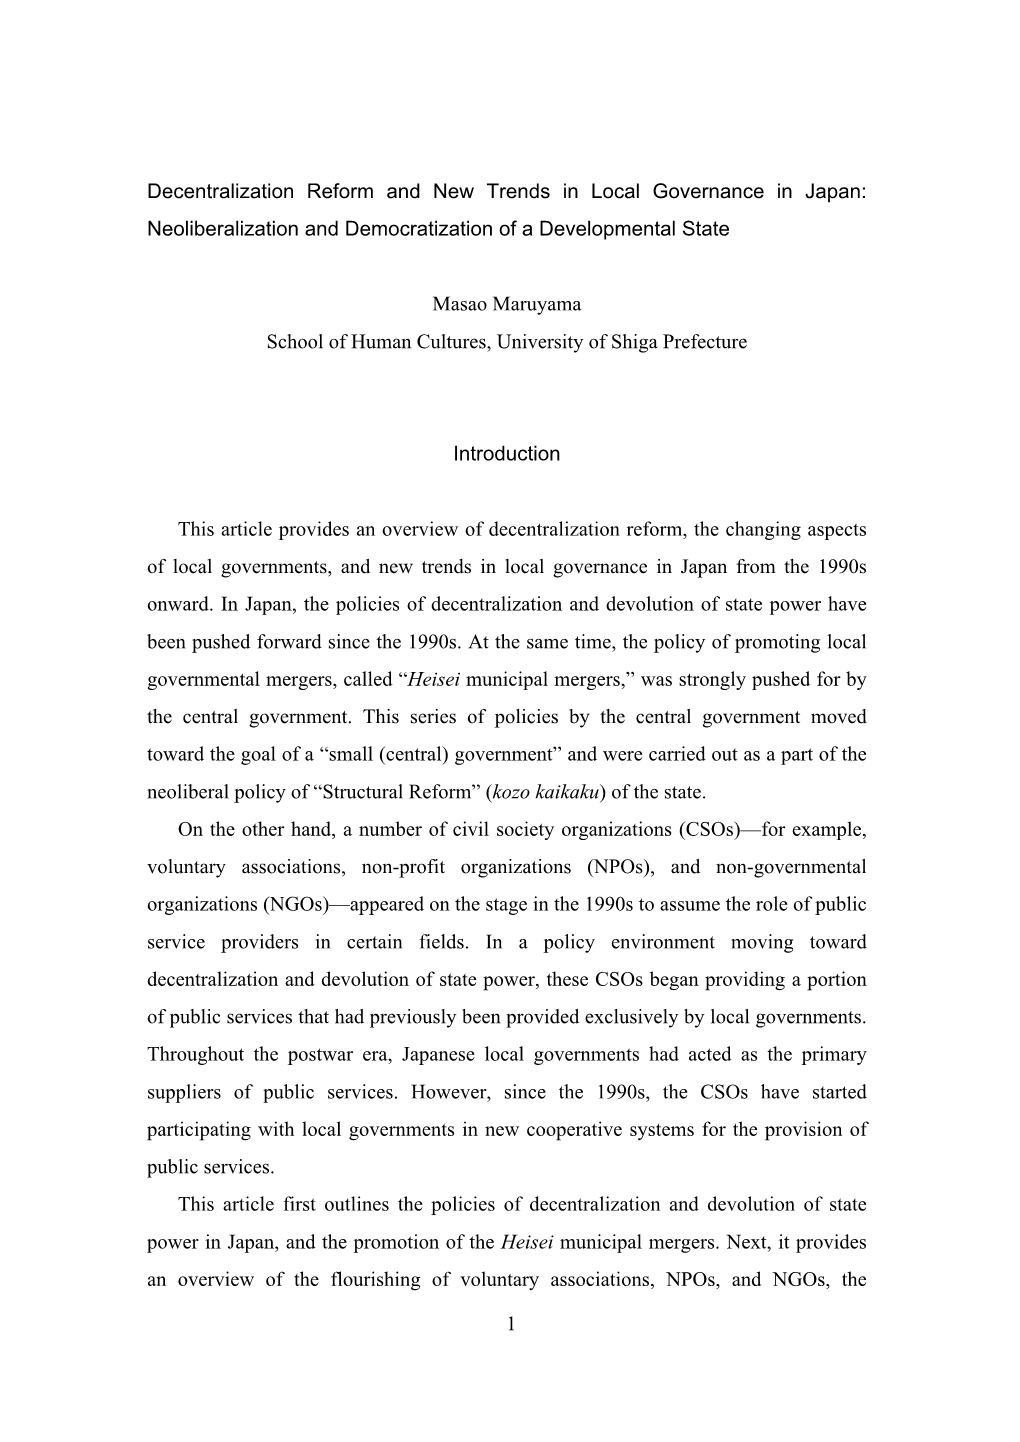 Decentralization Reform and New Trends in Local Governance in Japan: Neoliberalization and Democratization of a Developmental State